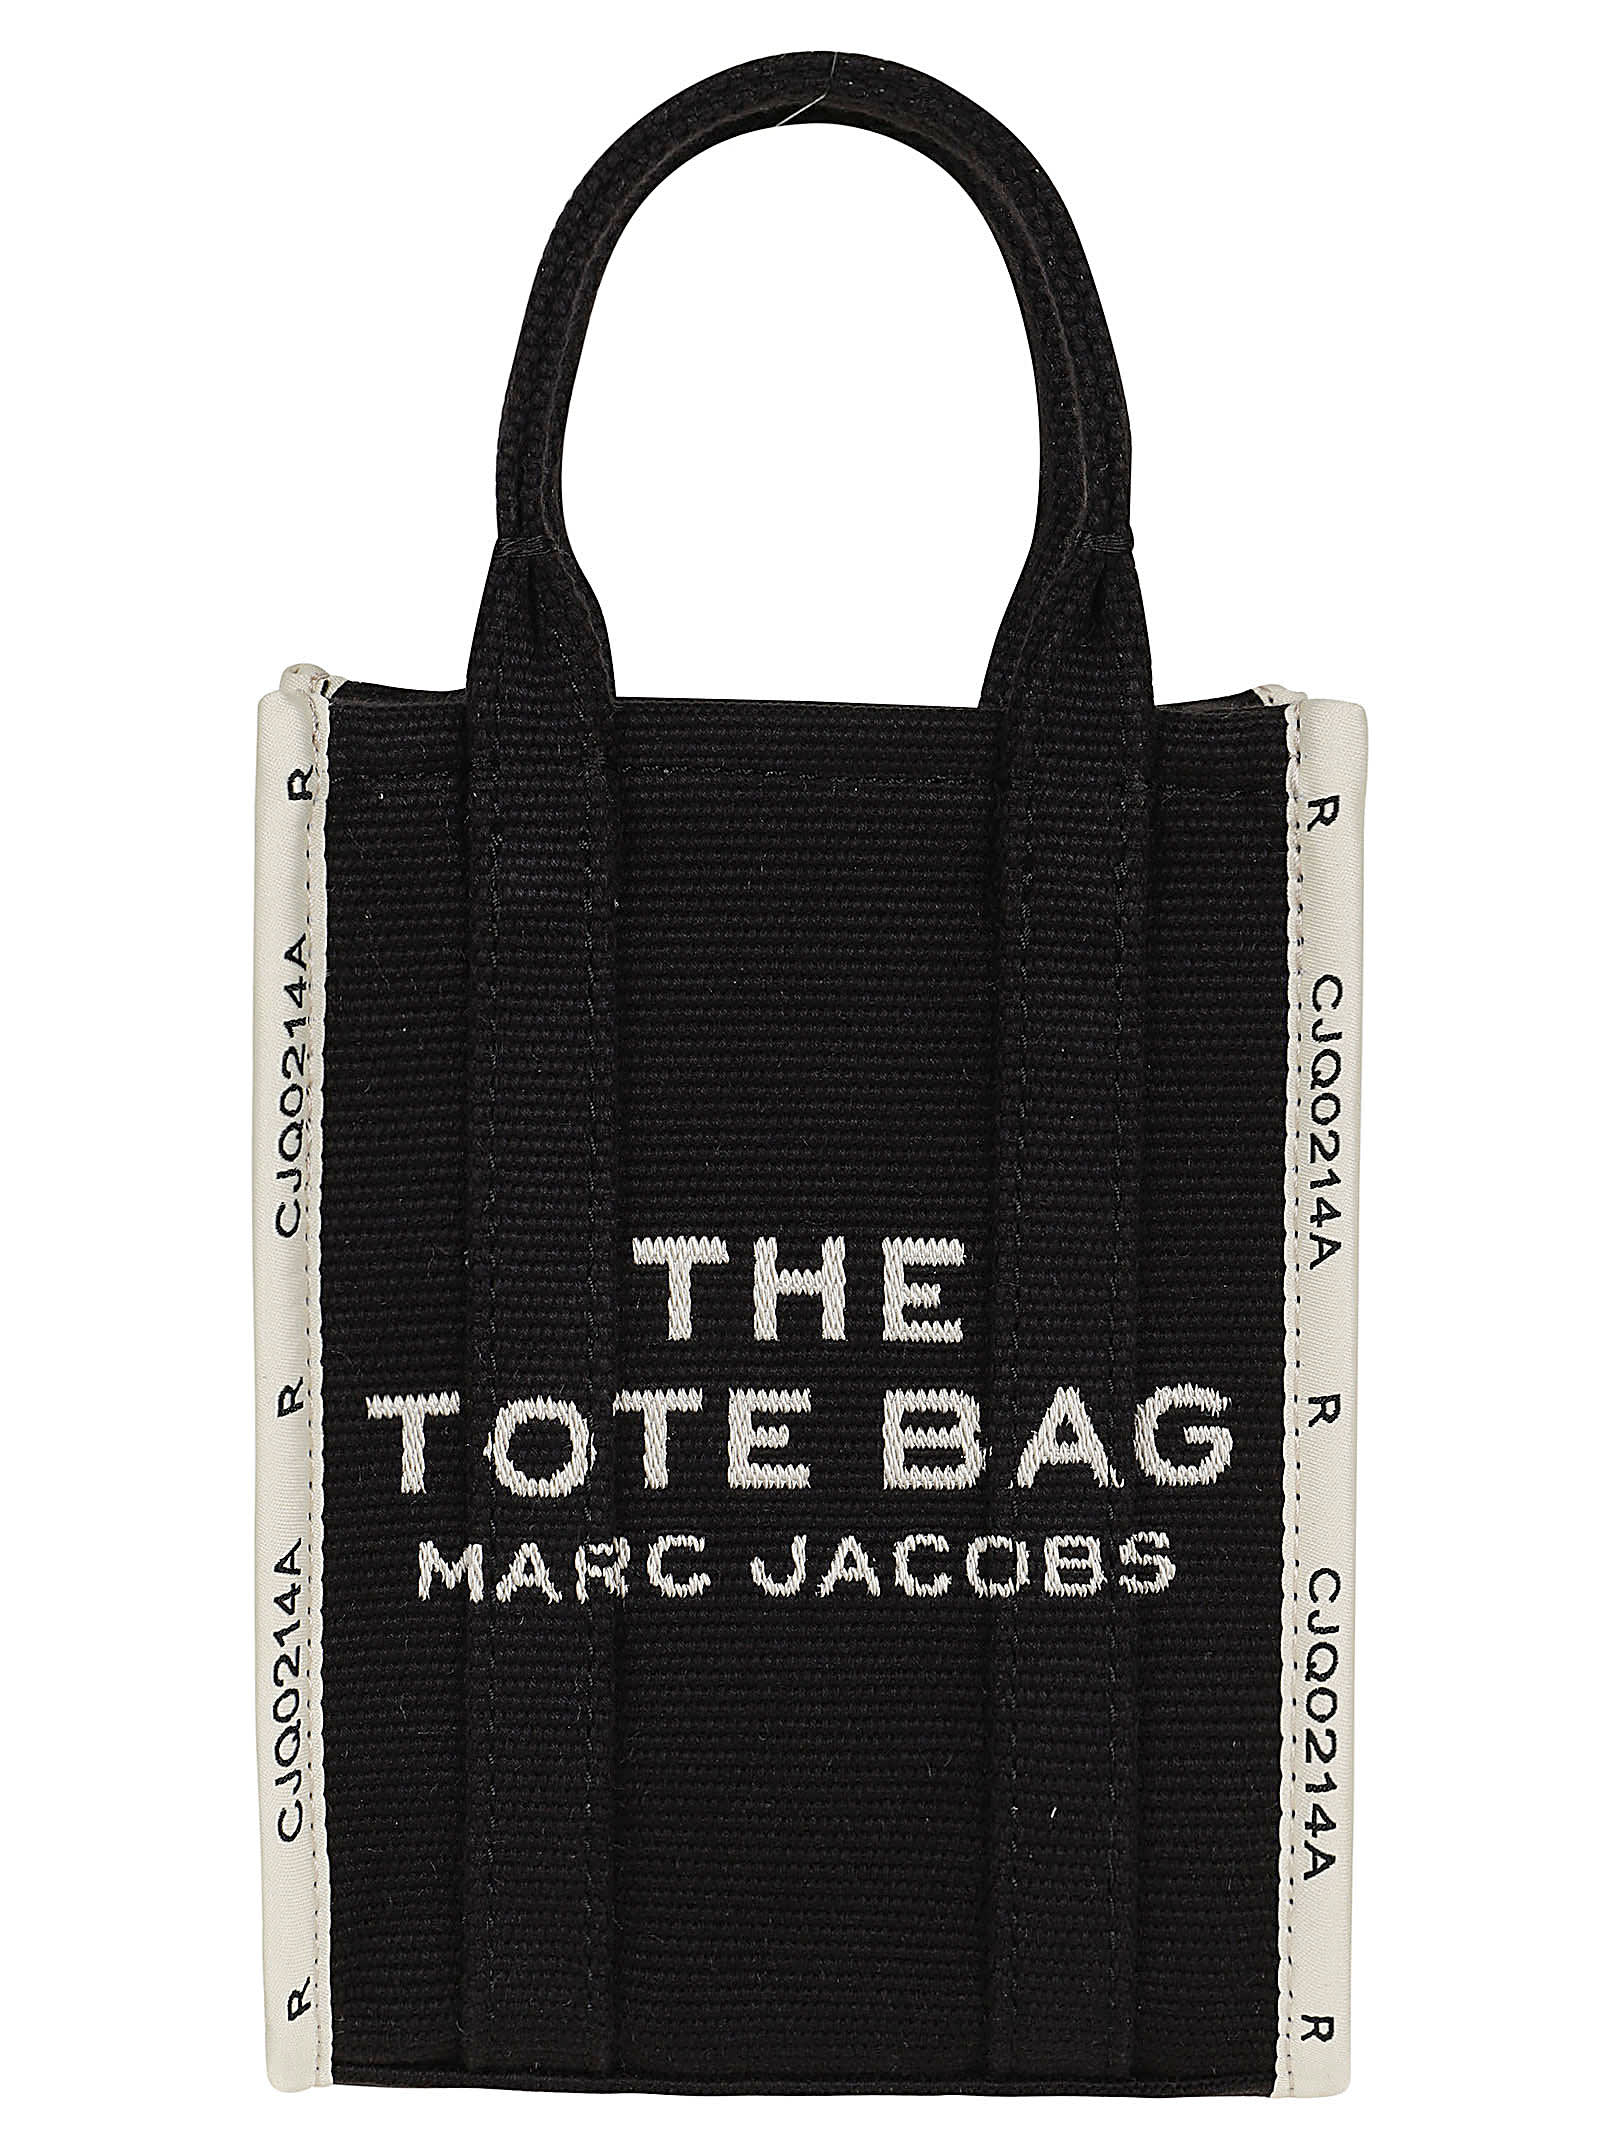 The Phone Tote